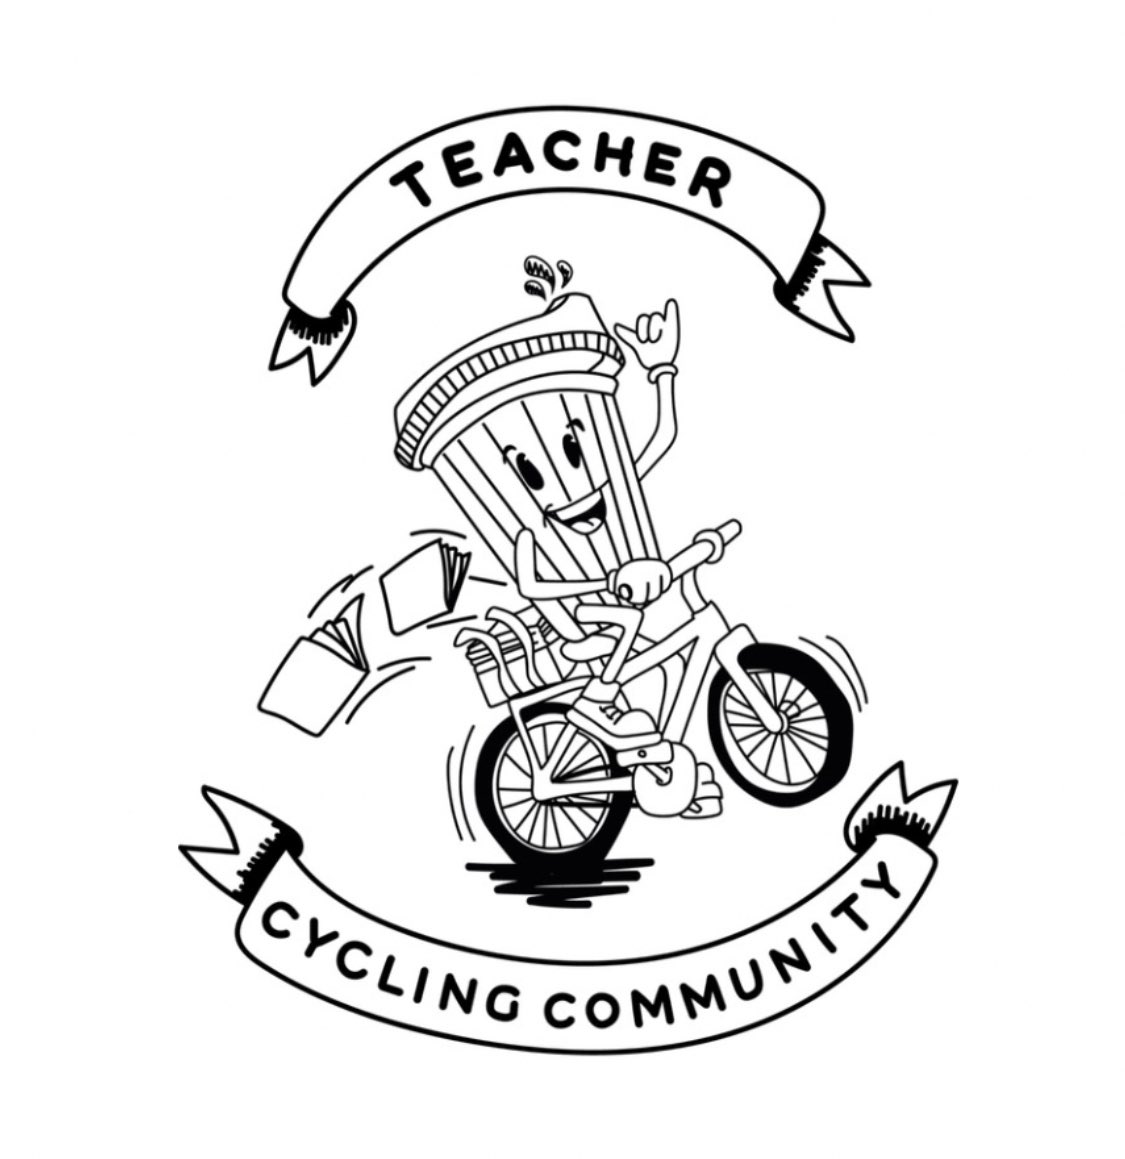 Jump on your bike tomorrow & RSVP to our ‘ride anywhere’ event to share with others in the profession that you’re looking after yourself doing something you enjoy. £5 goes to @mentalhealth and £5 to @EdSupportUK from new member subs this week teachercycling.com/member-events